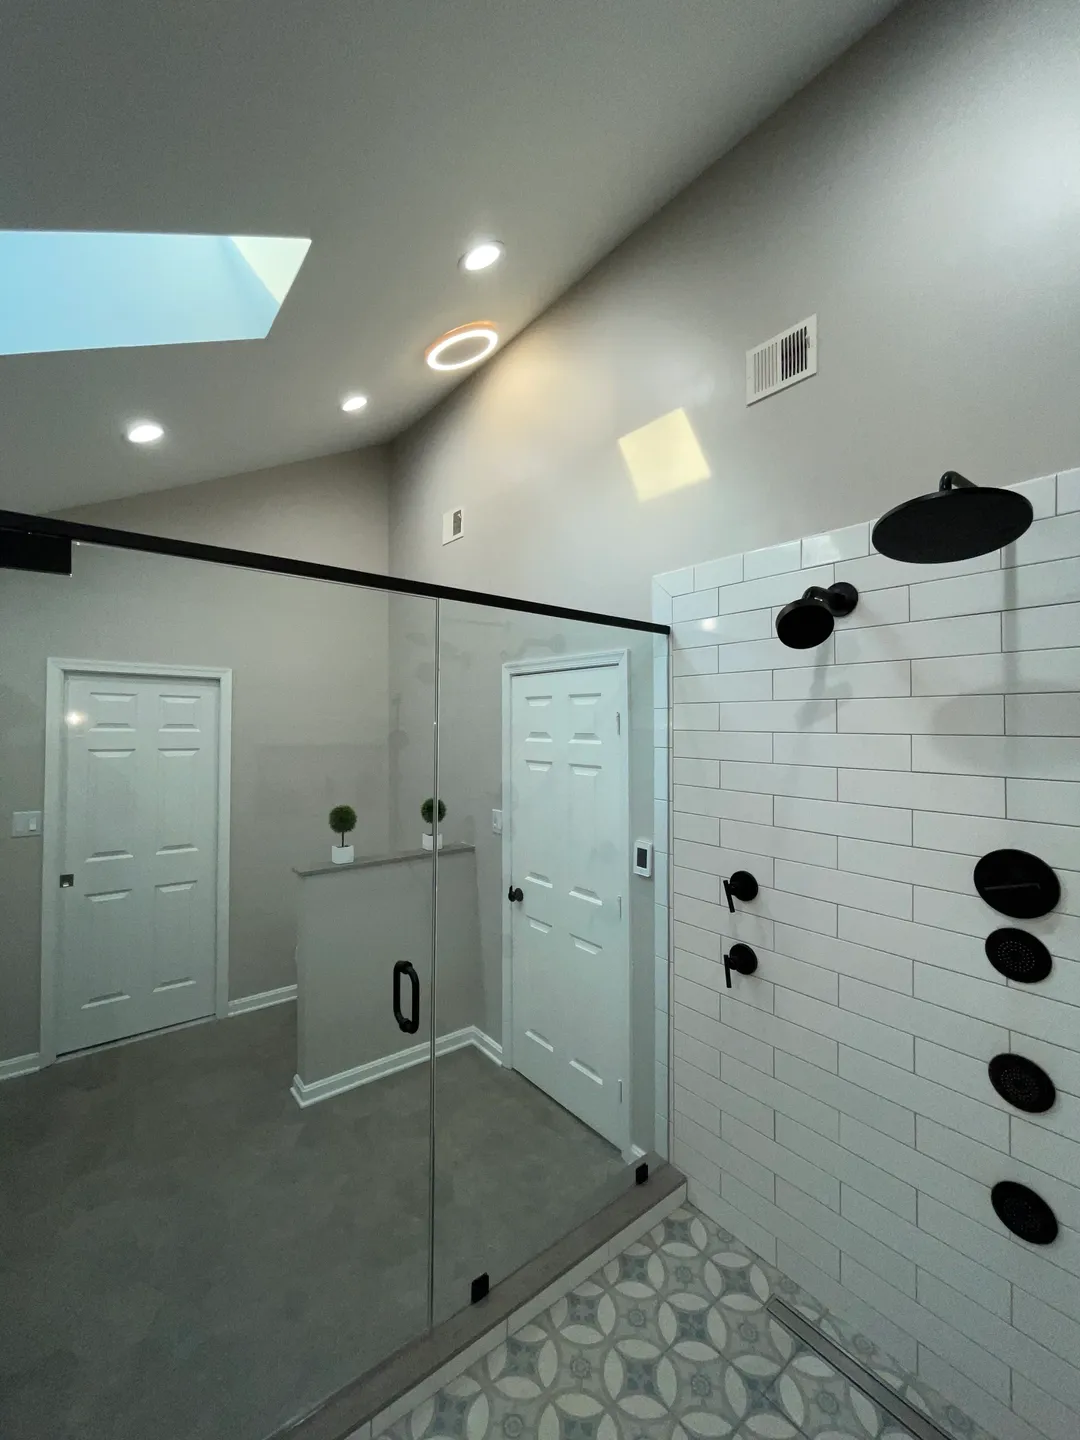 A bathroom with white walls and black accents.